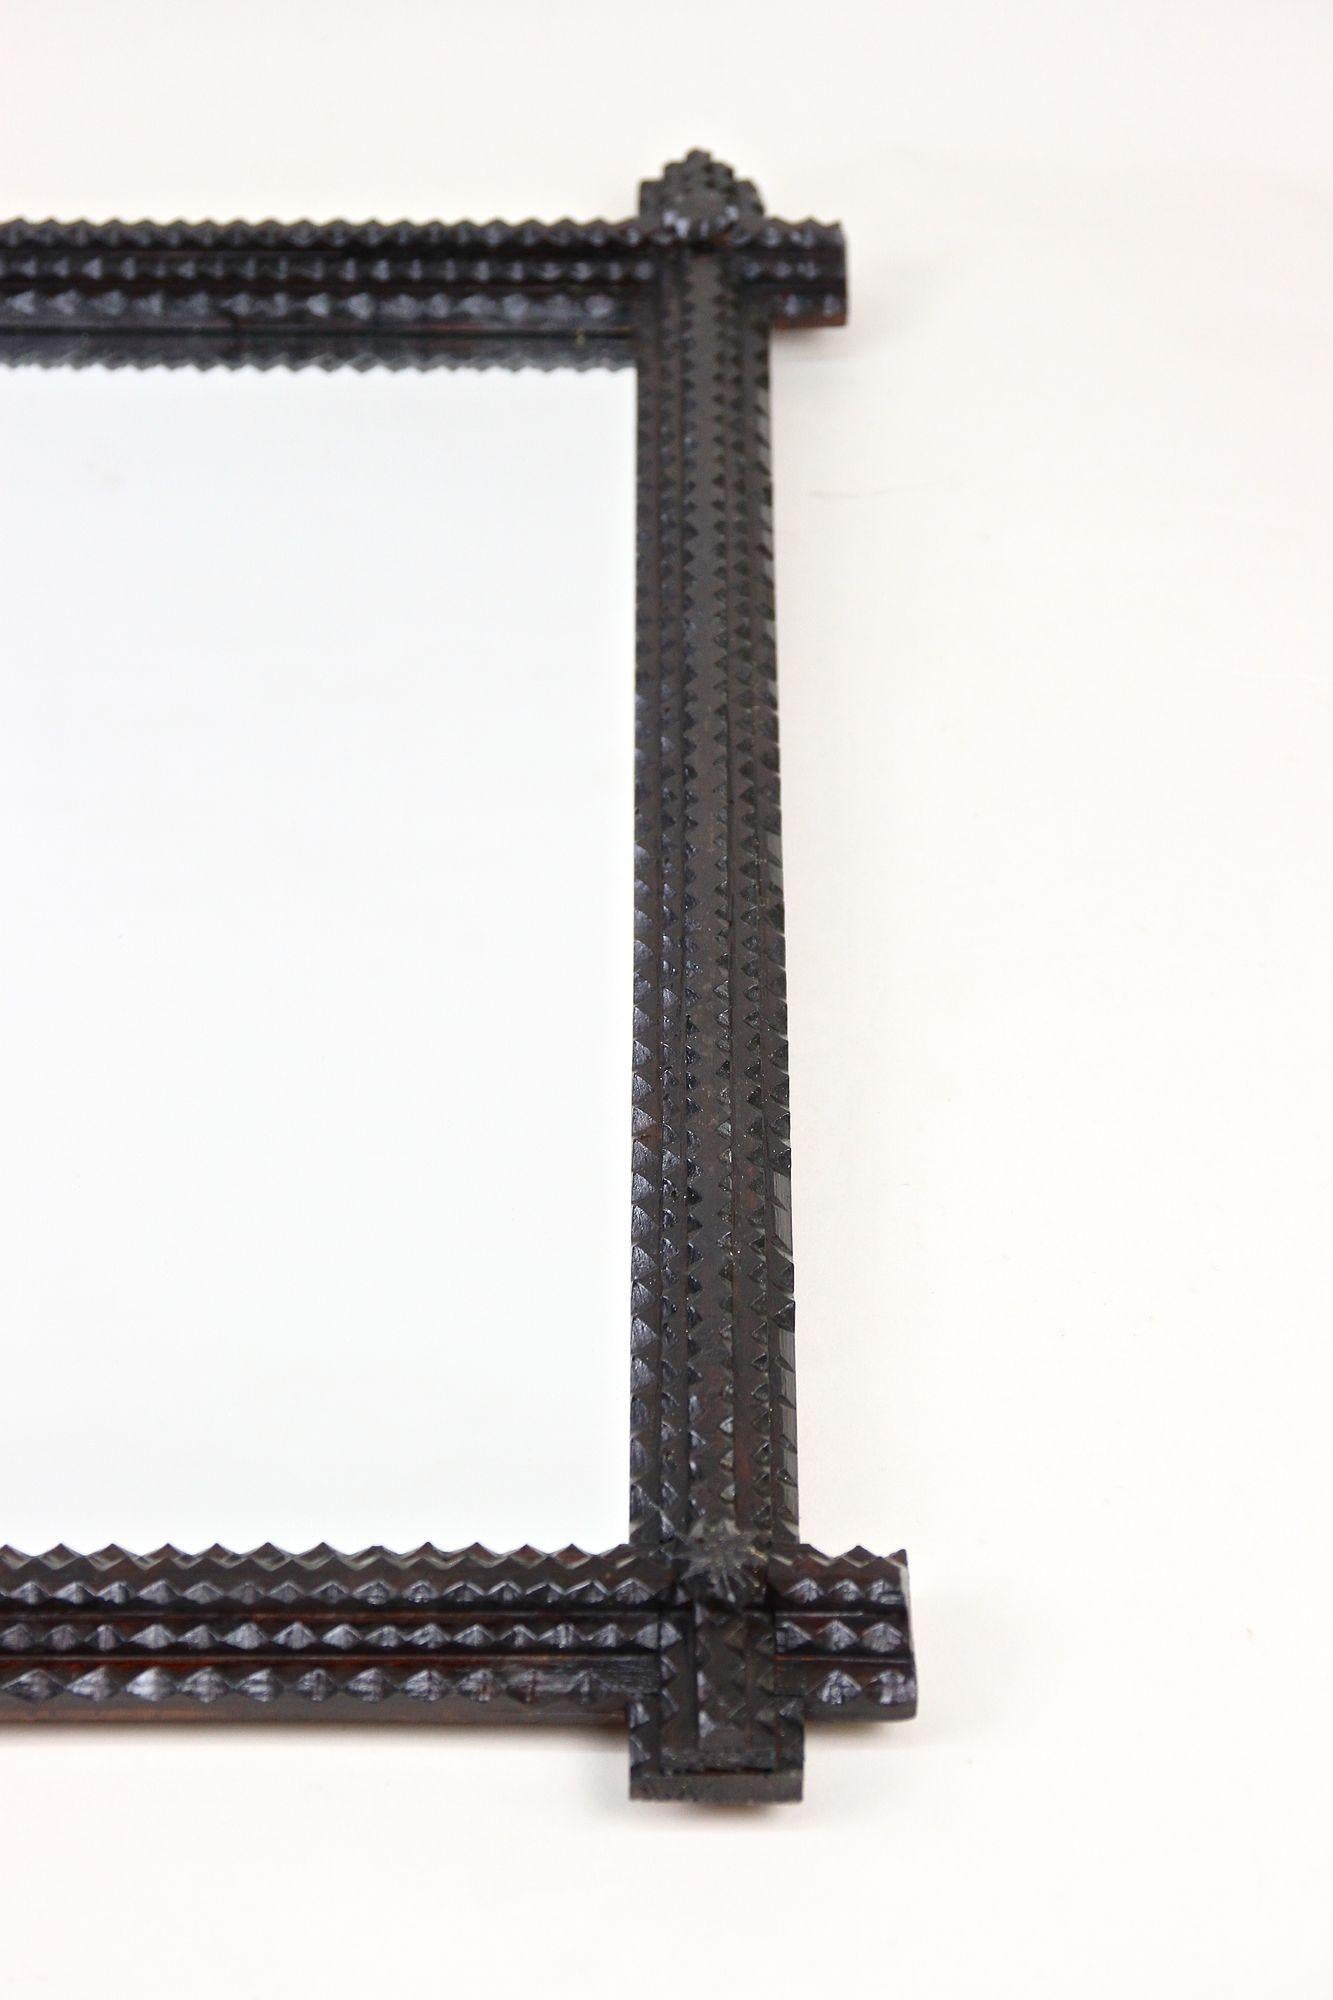 Tramp Art Rustic Wall Mirror With Protruding Corners, Austria ca. 1880 For Sale 4